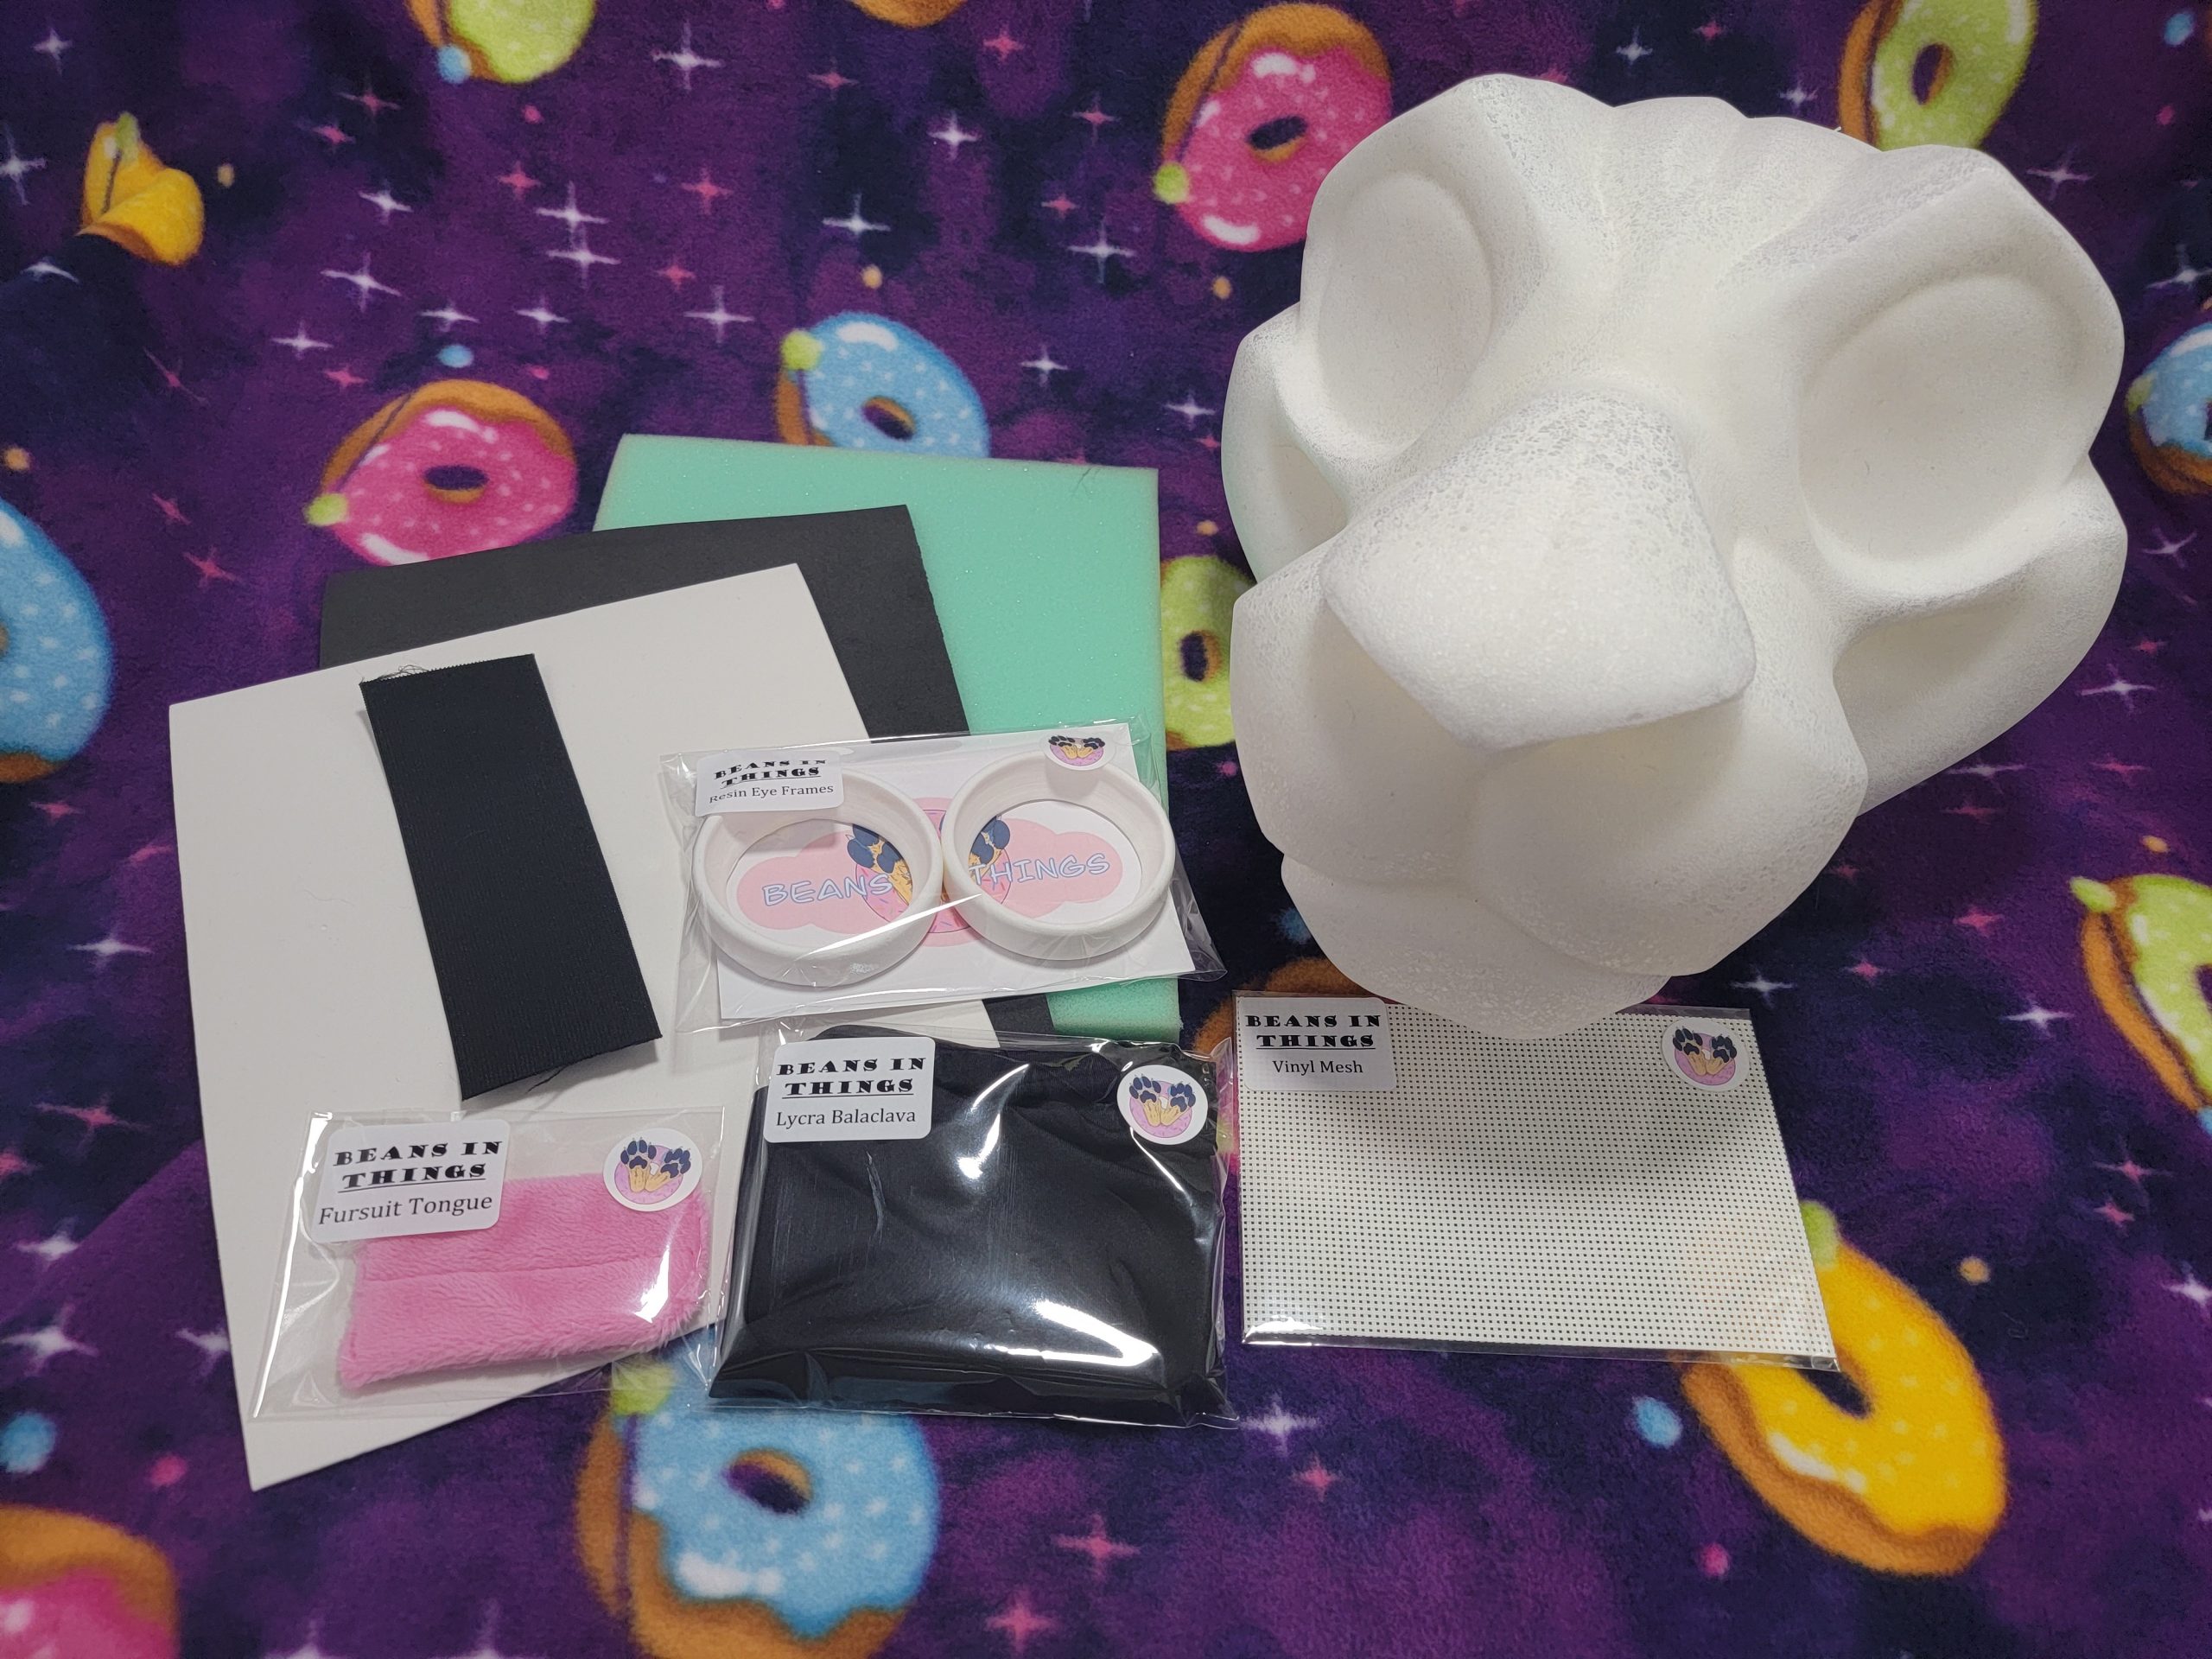 A kit for creating your own big cat costume is shown. To the right is a large cat base made from soft foam, surrounded by foam sheets, resin eye frames, a pink fabric tongue, a pouch with a folded balaclava and two strips of elastic.